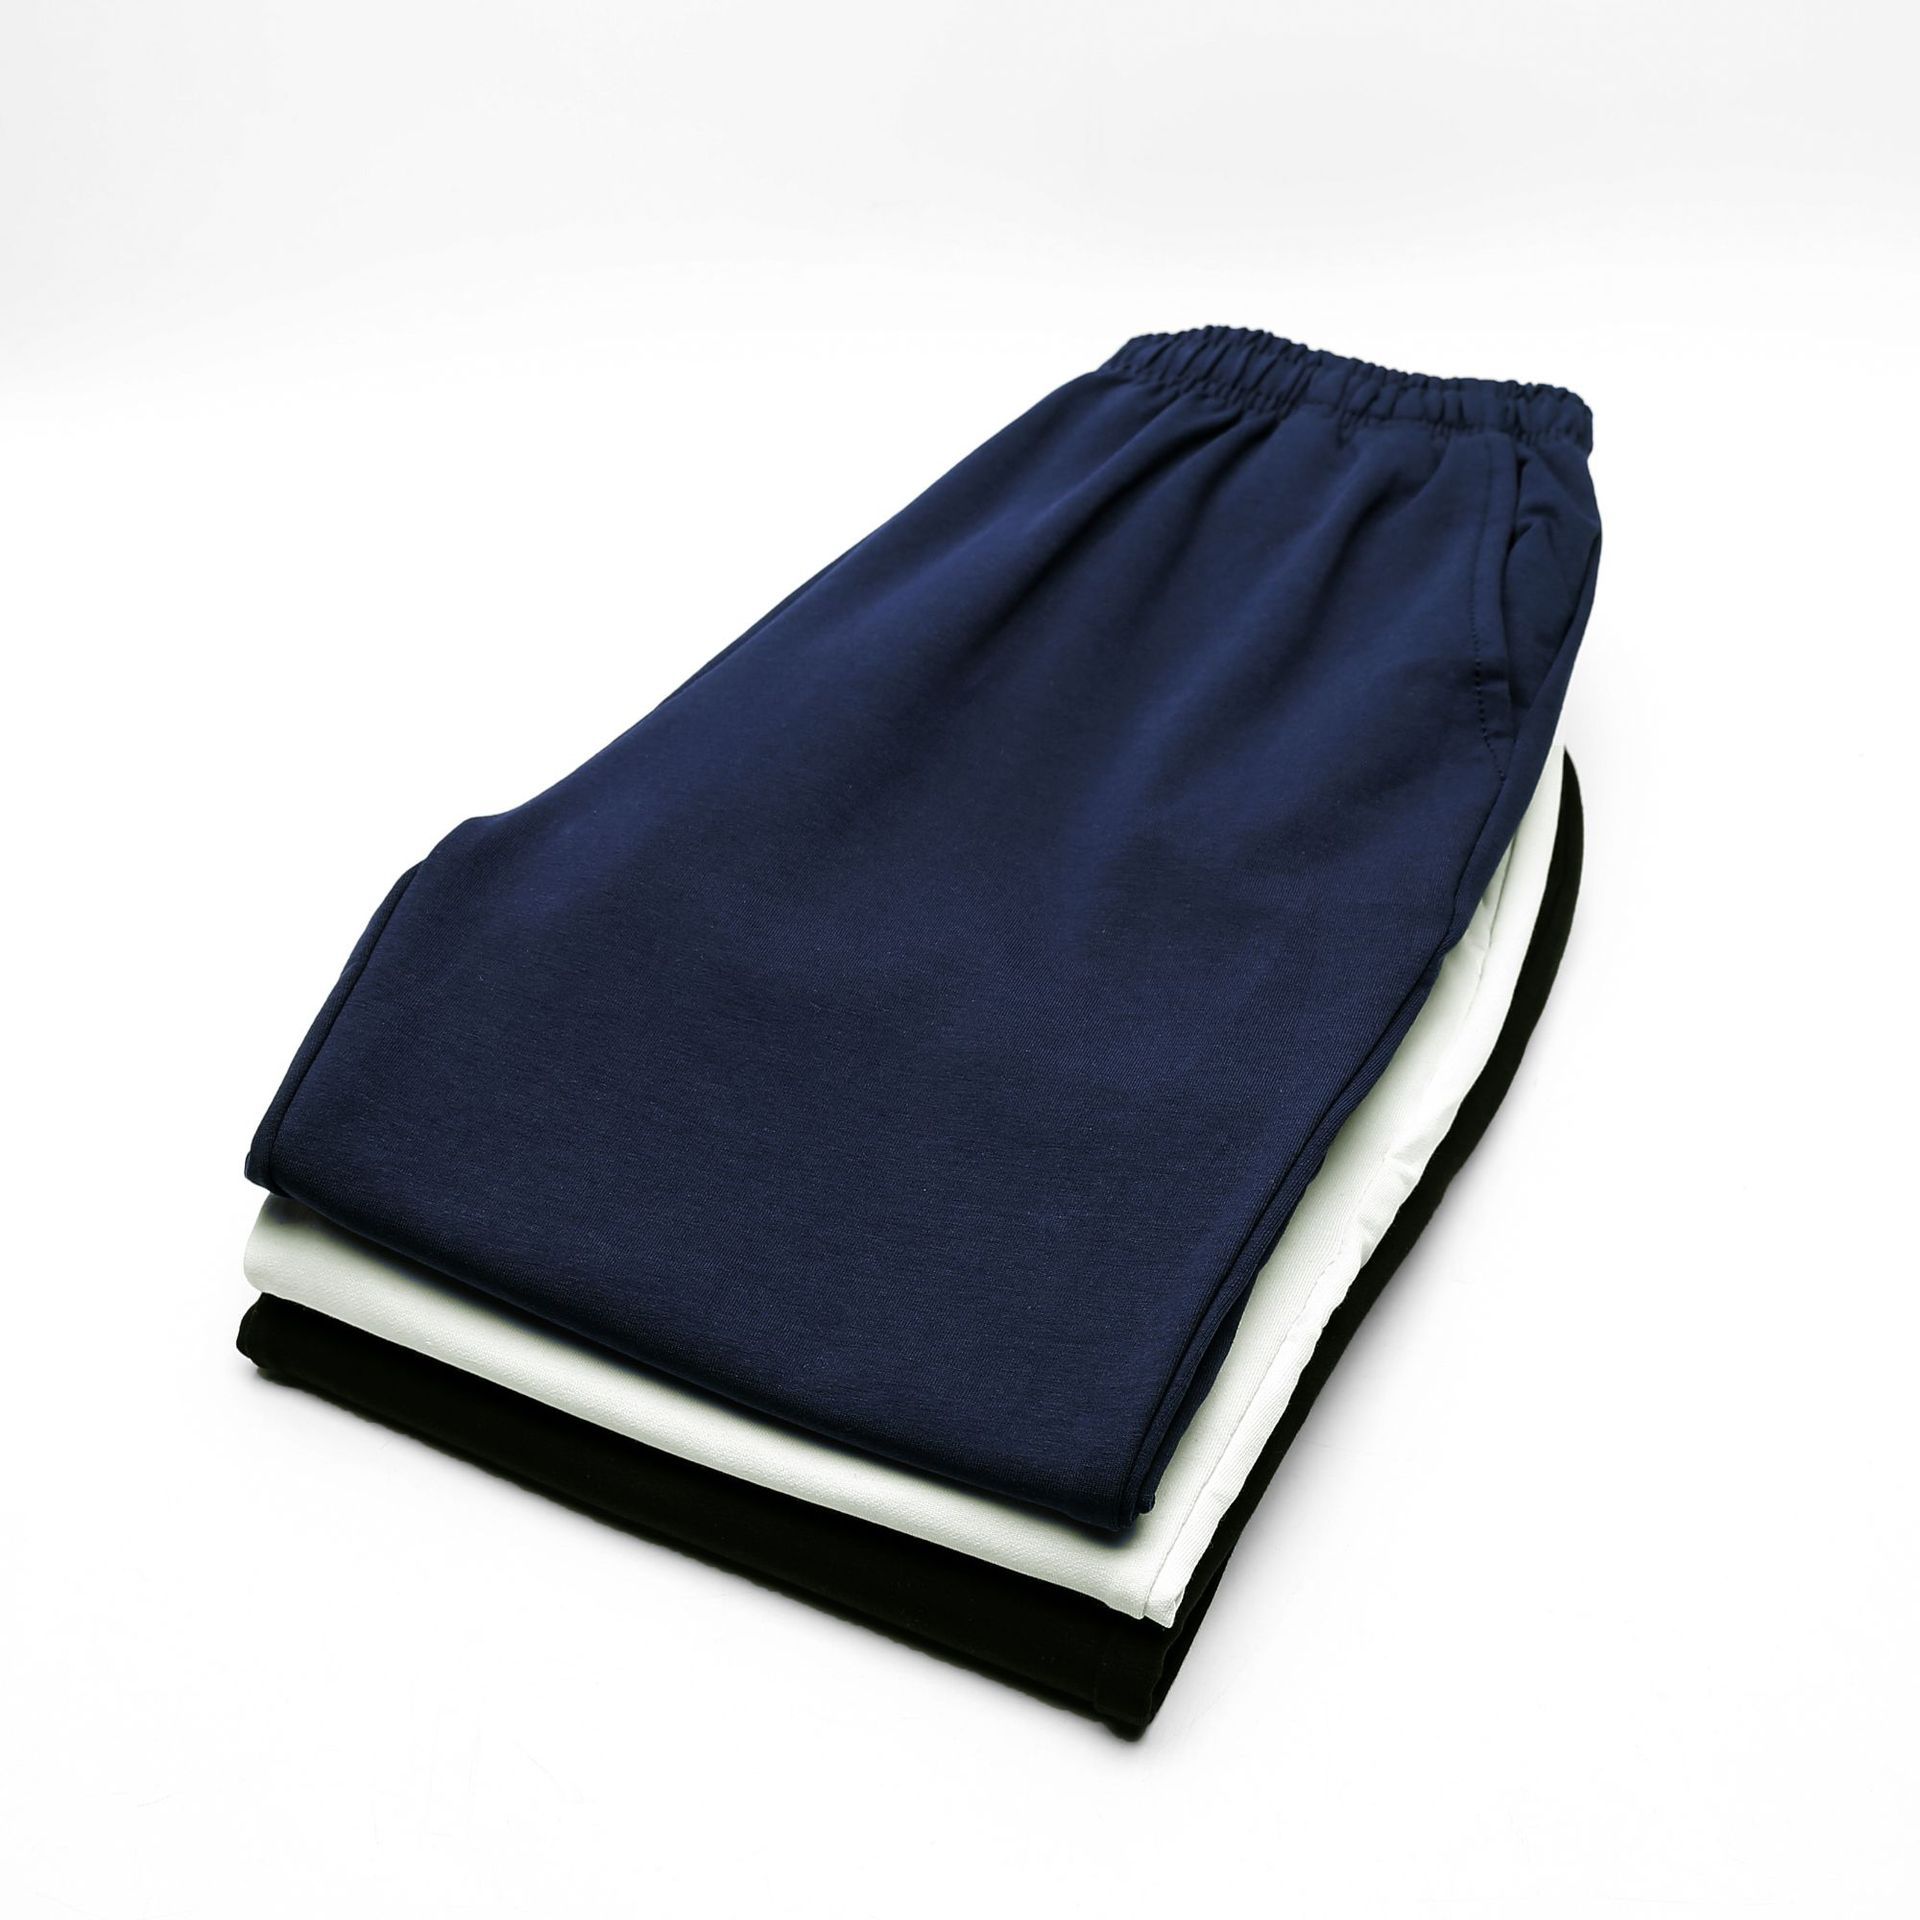 School uniform trousers for primary and middle school students straight black dark blue boys and girls sports casual pants spring and autumn thin section plus velvet